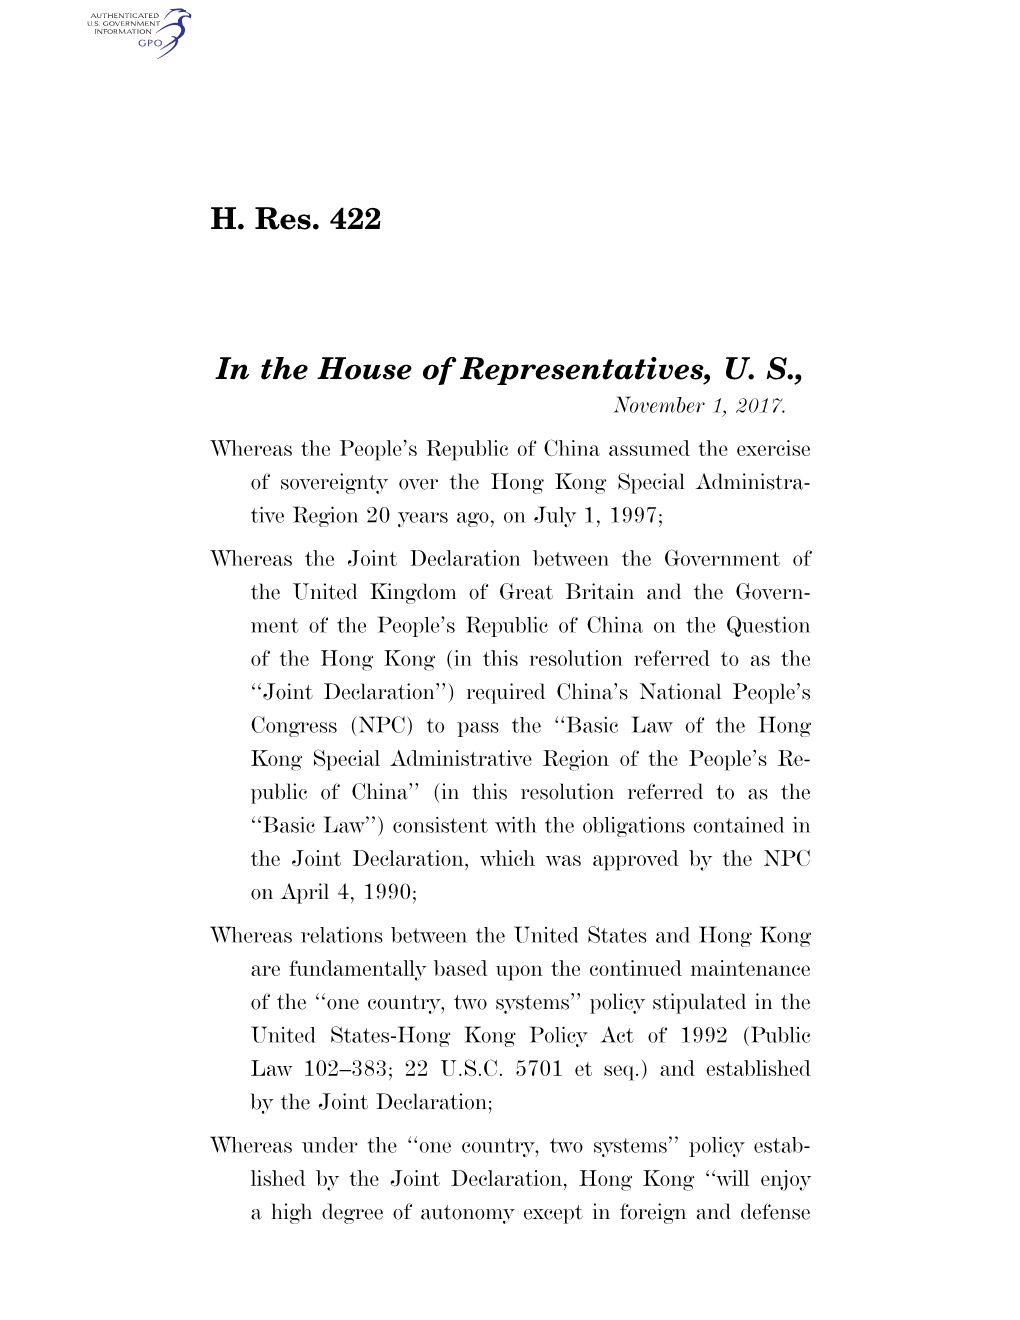 H. Res. 422 in the House of Representatives, U